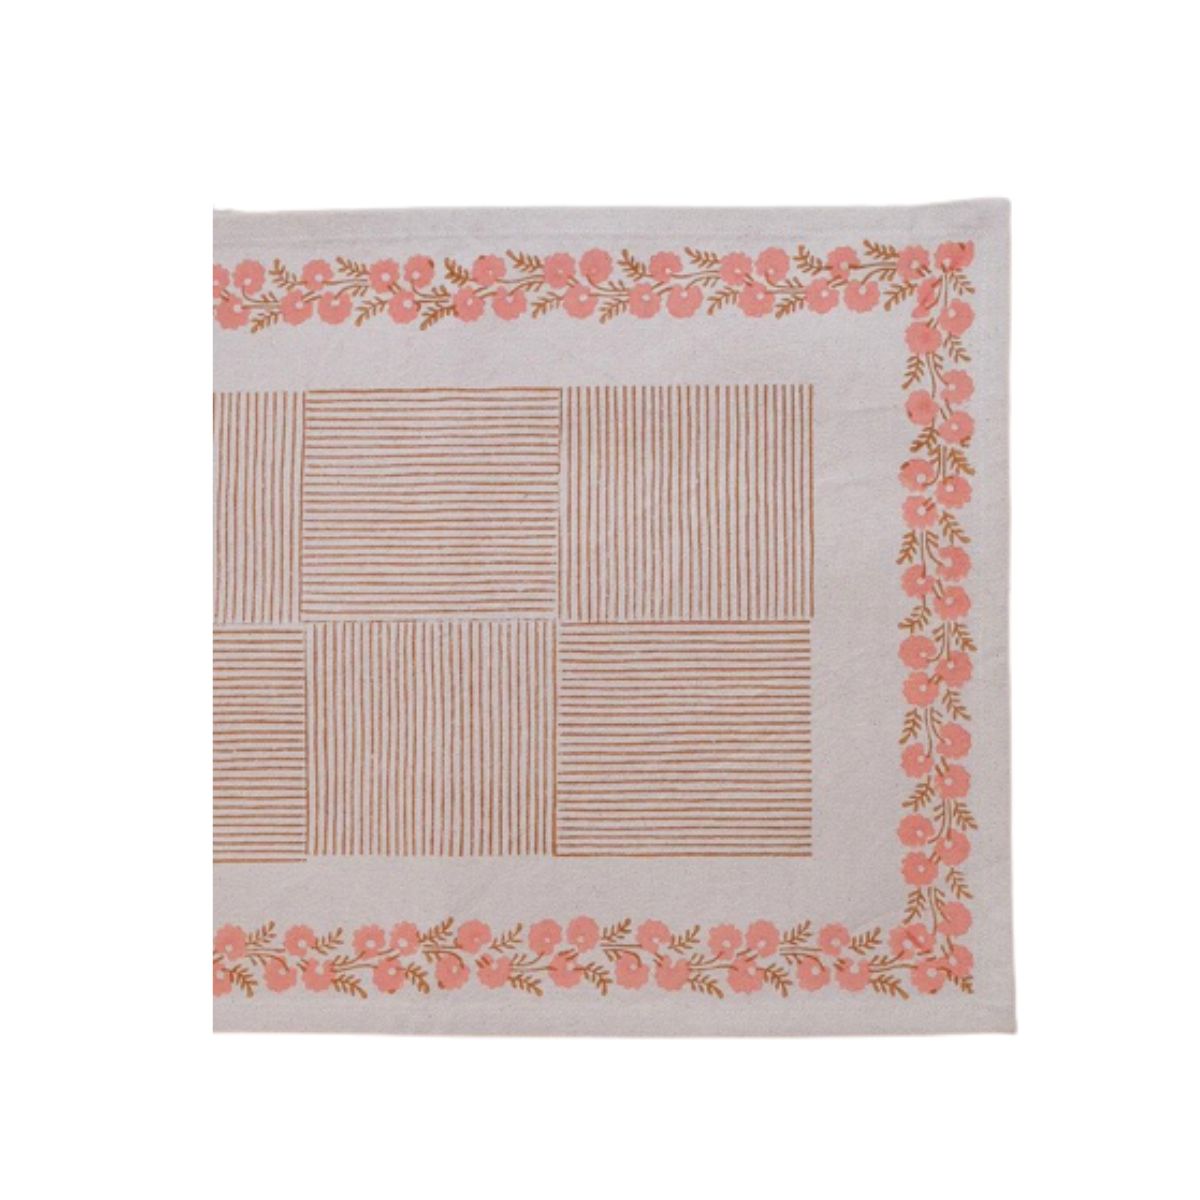 Shika Hand Block Printed Floral Cotton Placemats, Set of 4